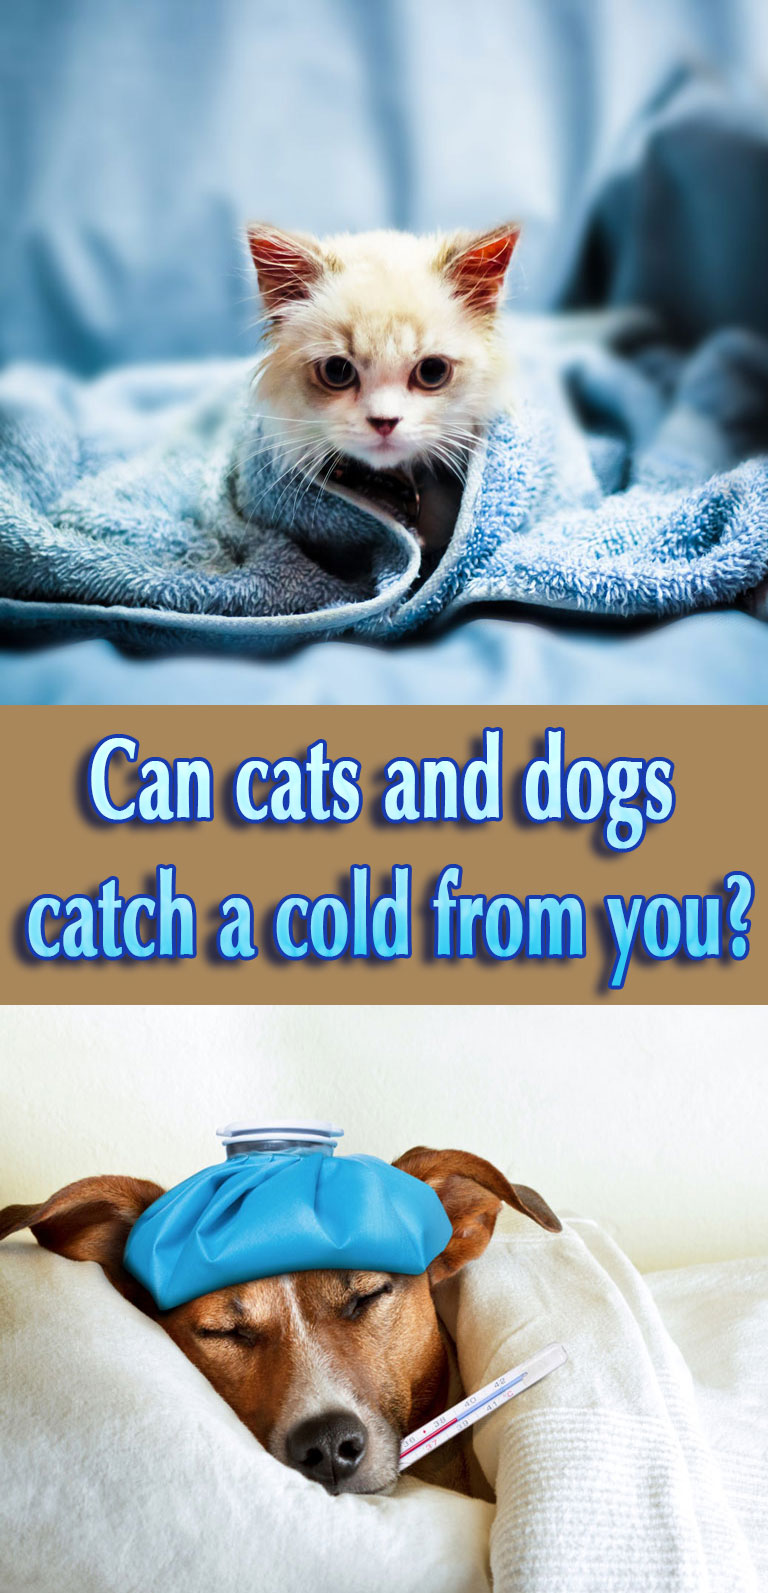 Can Your Pet Catch Your Cold